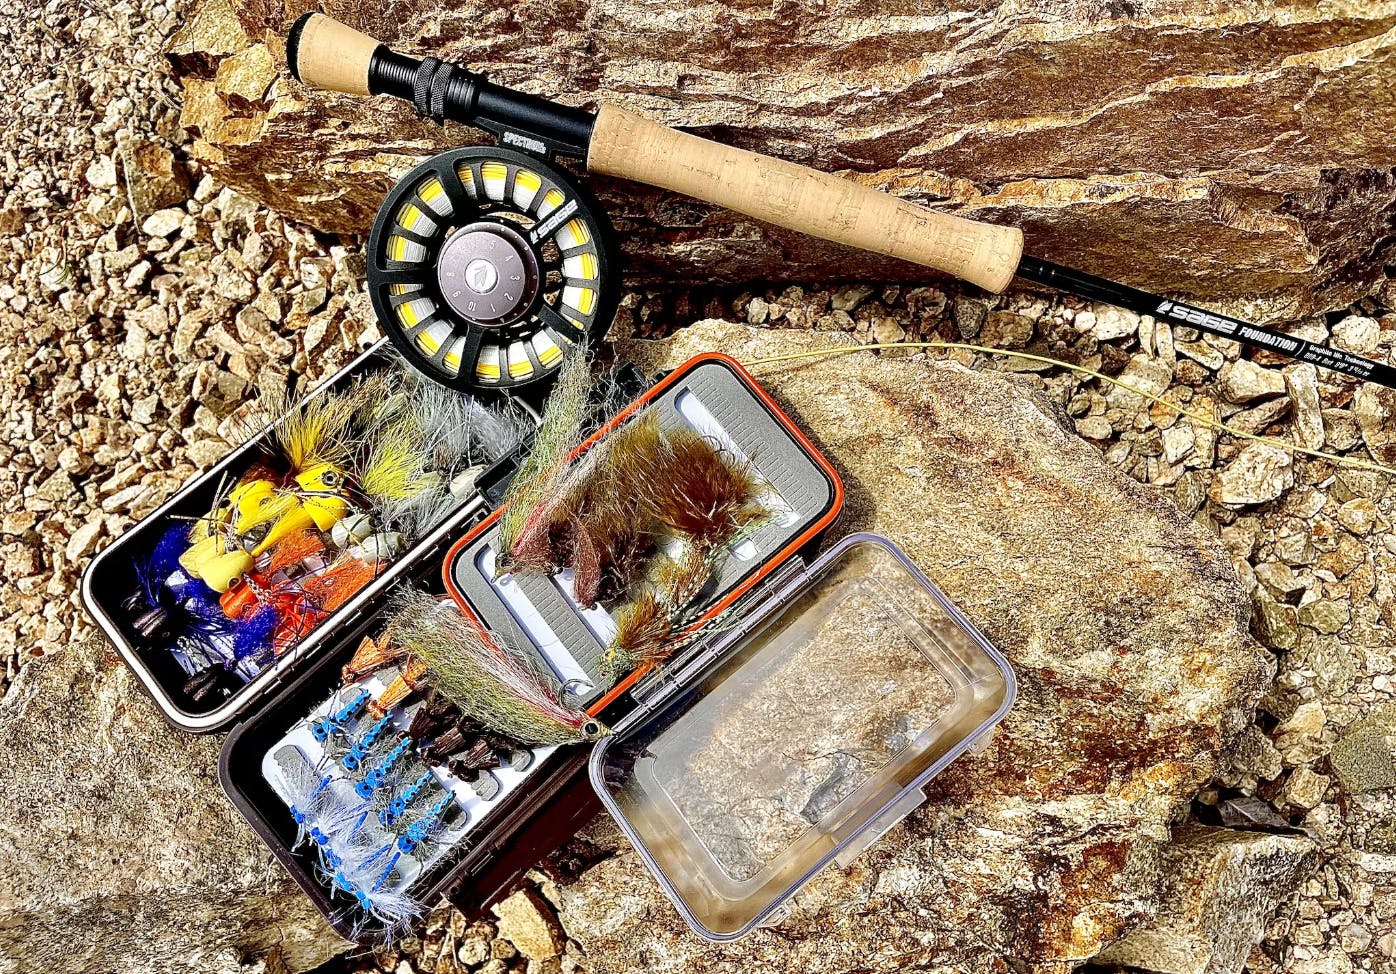 SF Fly Fishing Medium-Fast Action Rod Combo Kit Piece 7/8wt, 56% OFF